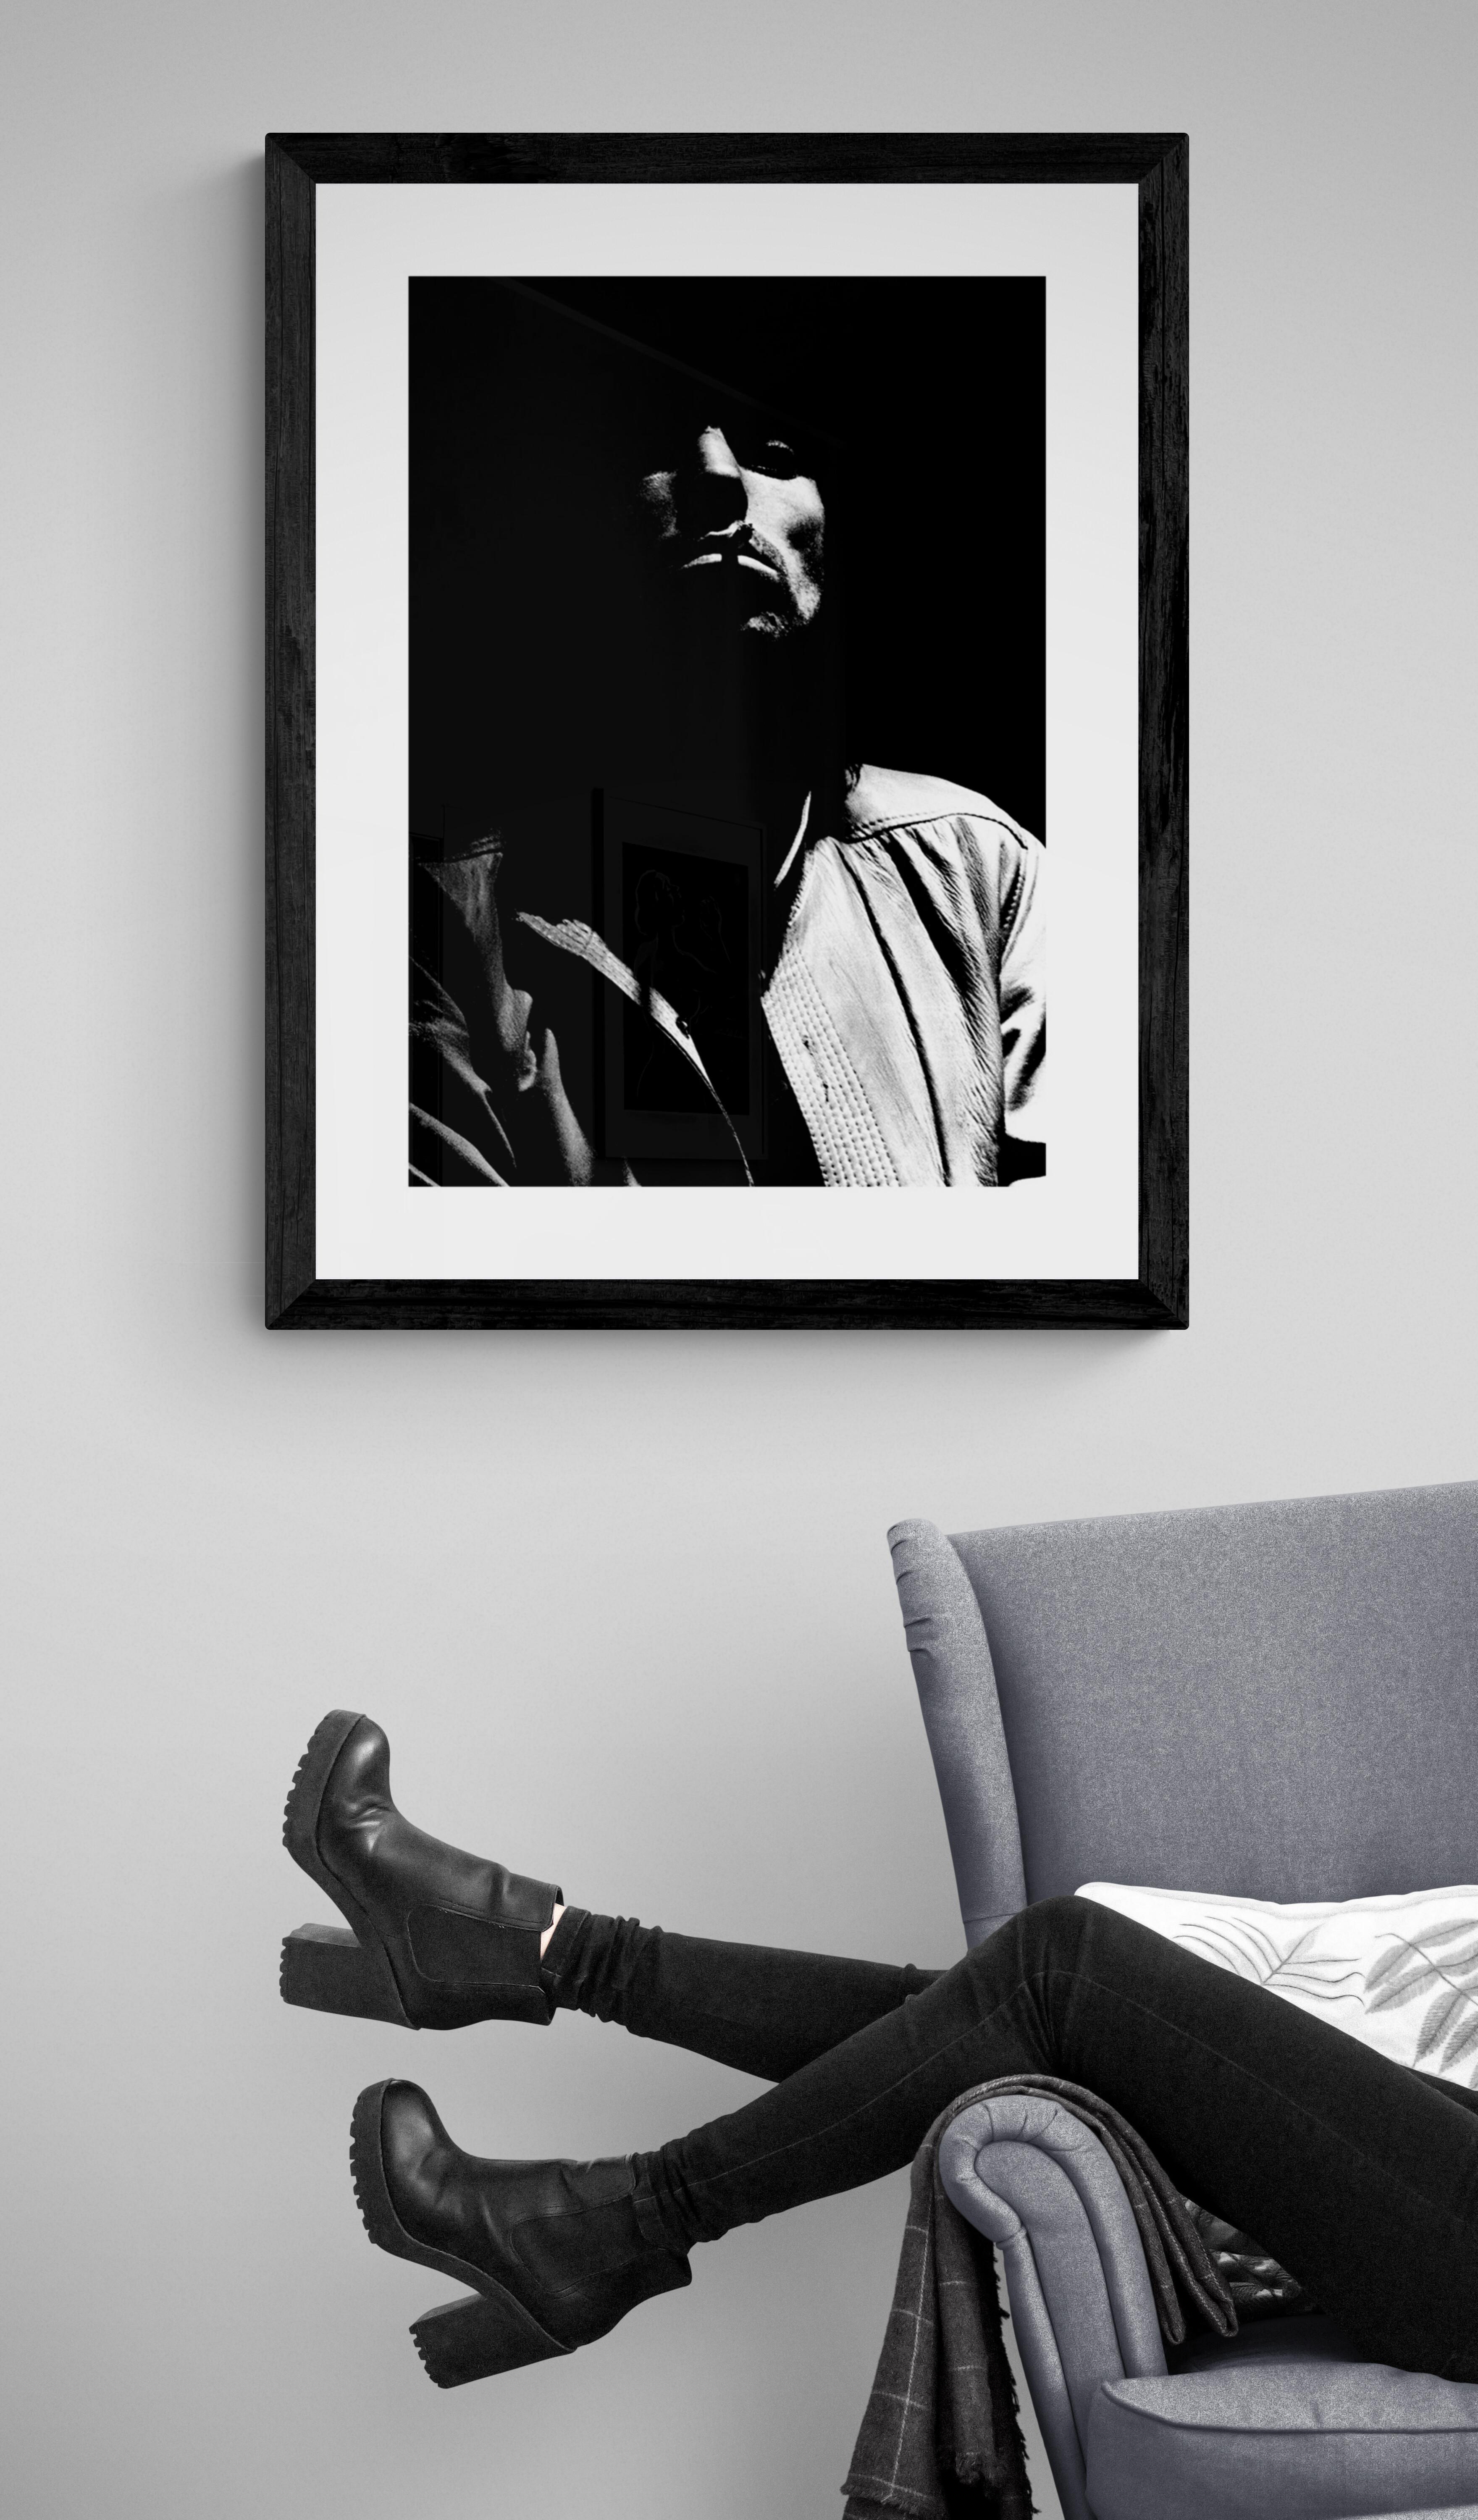 Title: Keith Richards #1 Photo
Artist: Richard E. Aaron
Estate Edition: Hand numbered with estate chop mark in the margin, signature stamp on verso, archival pigment print on Hahnemühle Photo Rag Pearl, 100% cotton paper fine art paper. Authorized